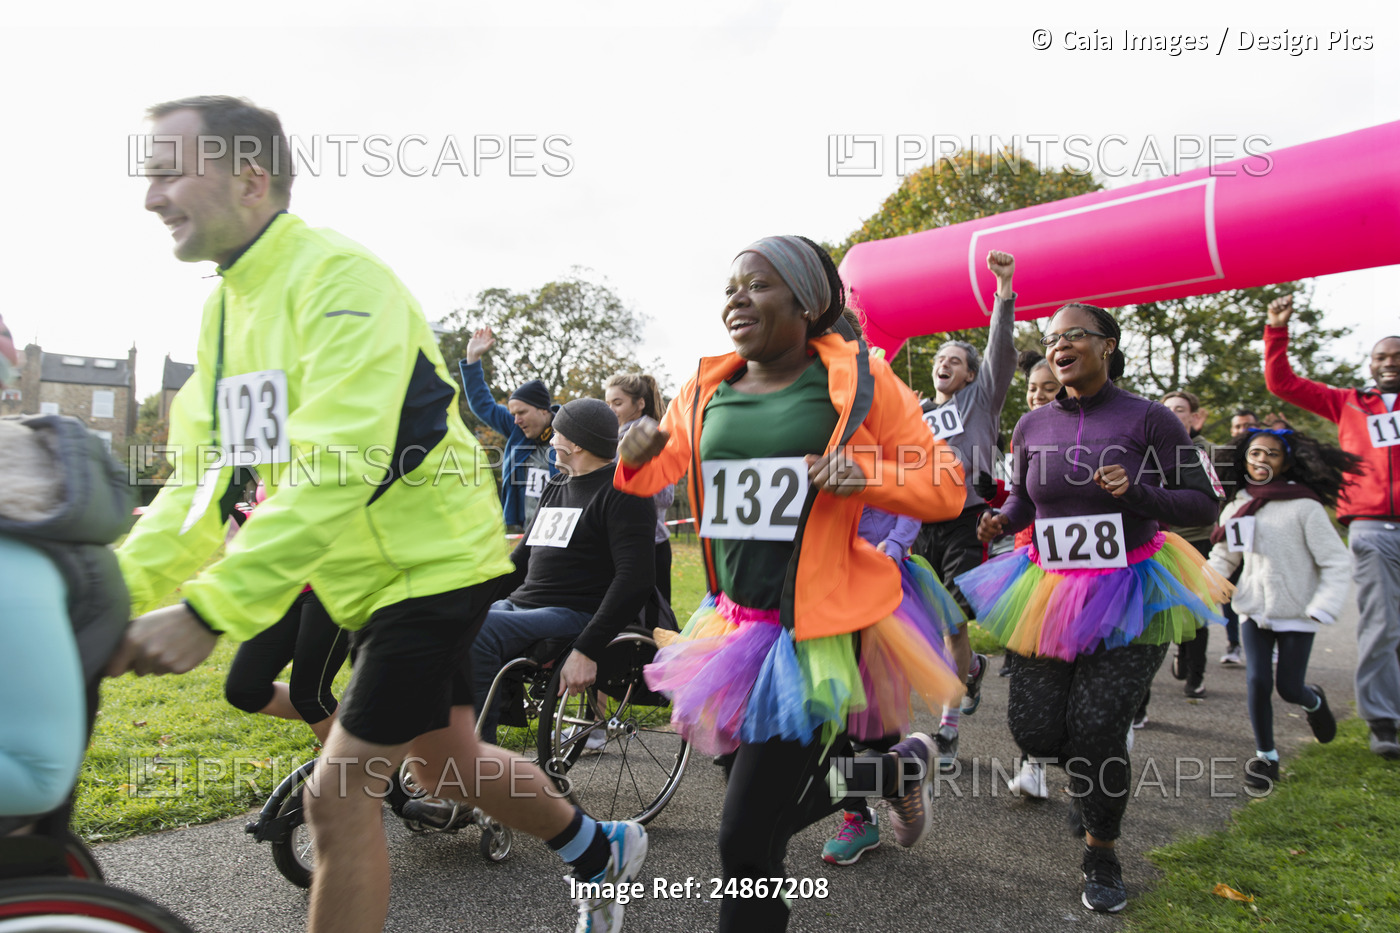 Enthusiastic runners running at charity run in park